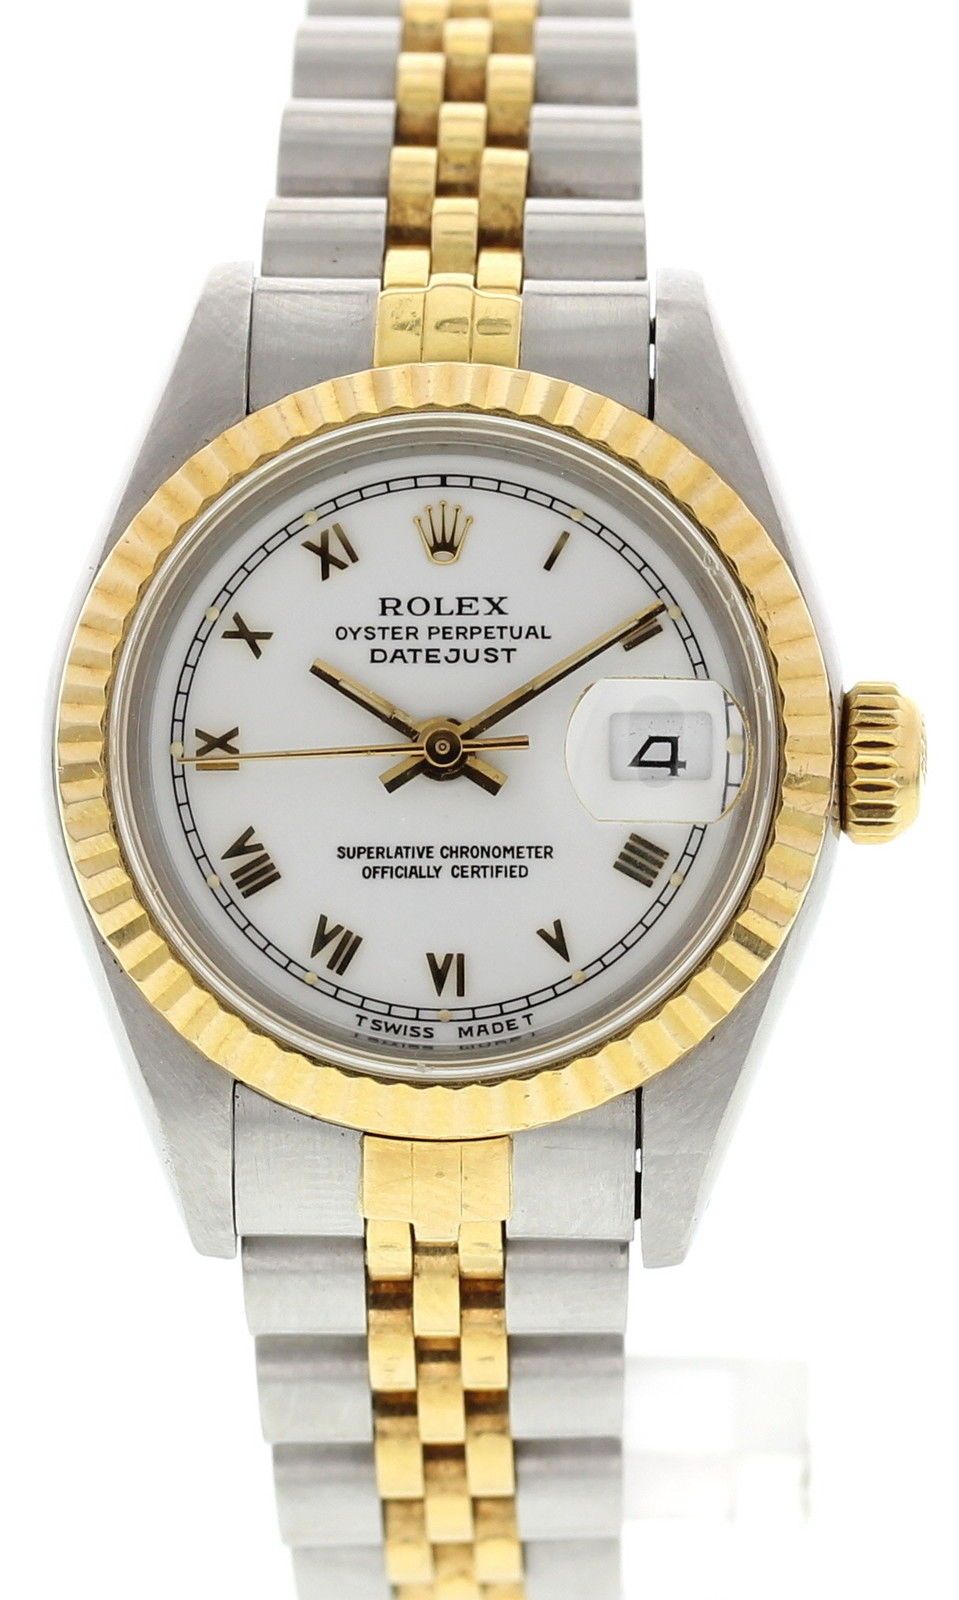 Rolex 69173 Oyster Perpetual Datejust 18K Yellow Gold Stainless Steel | TrueFacet